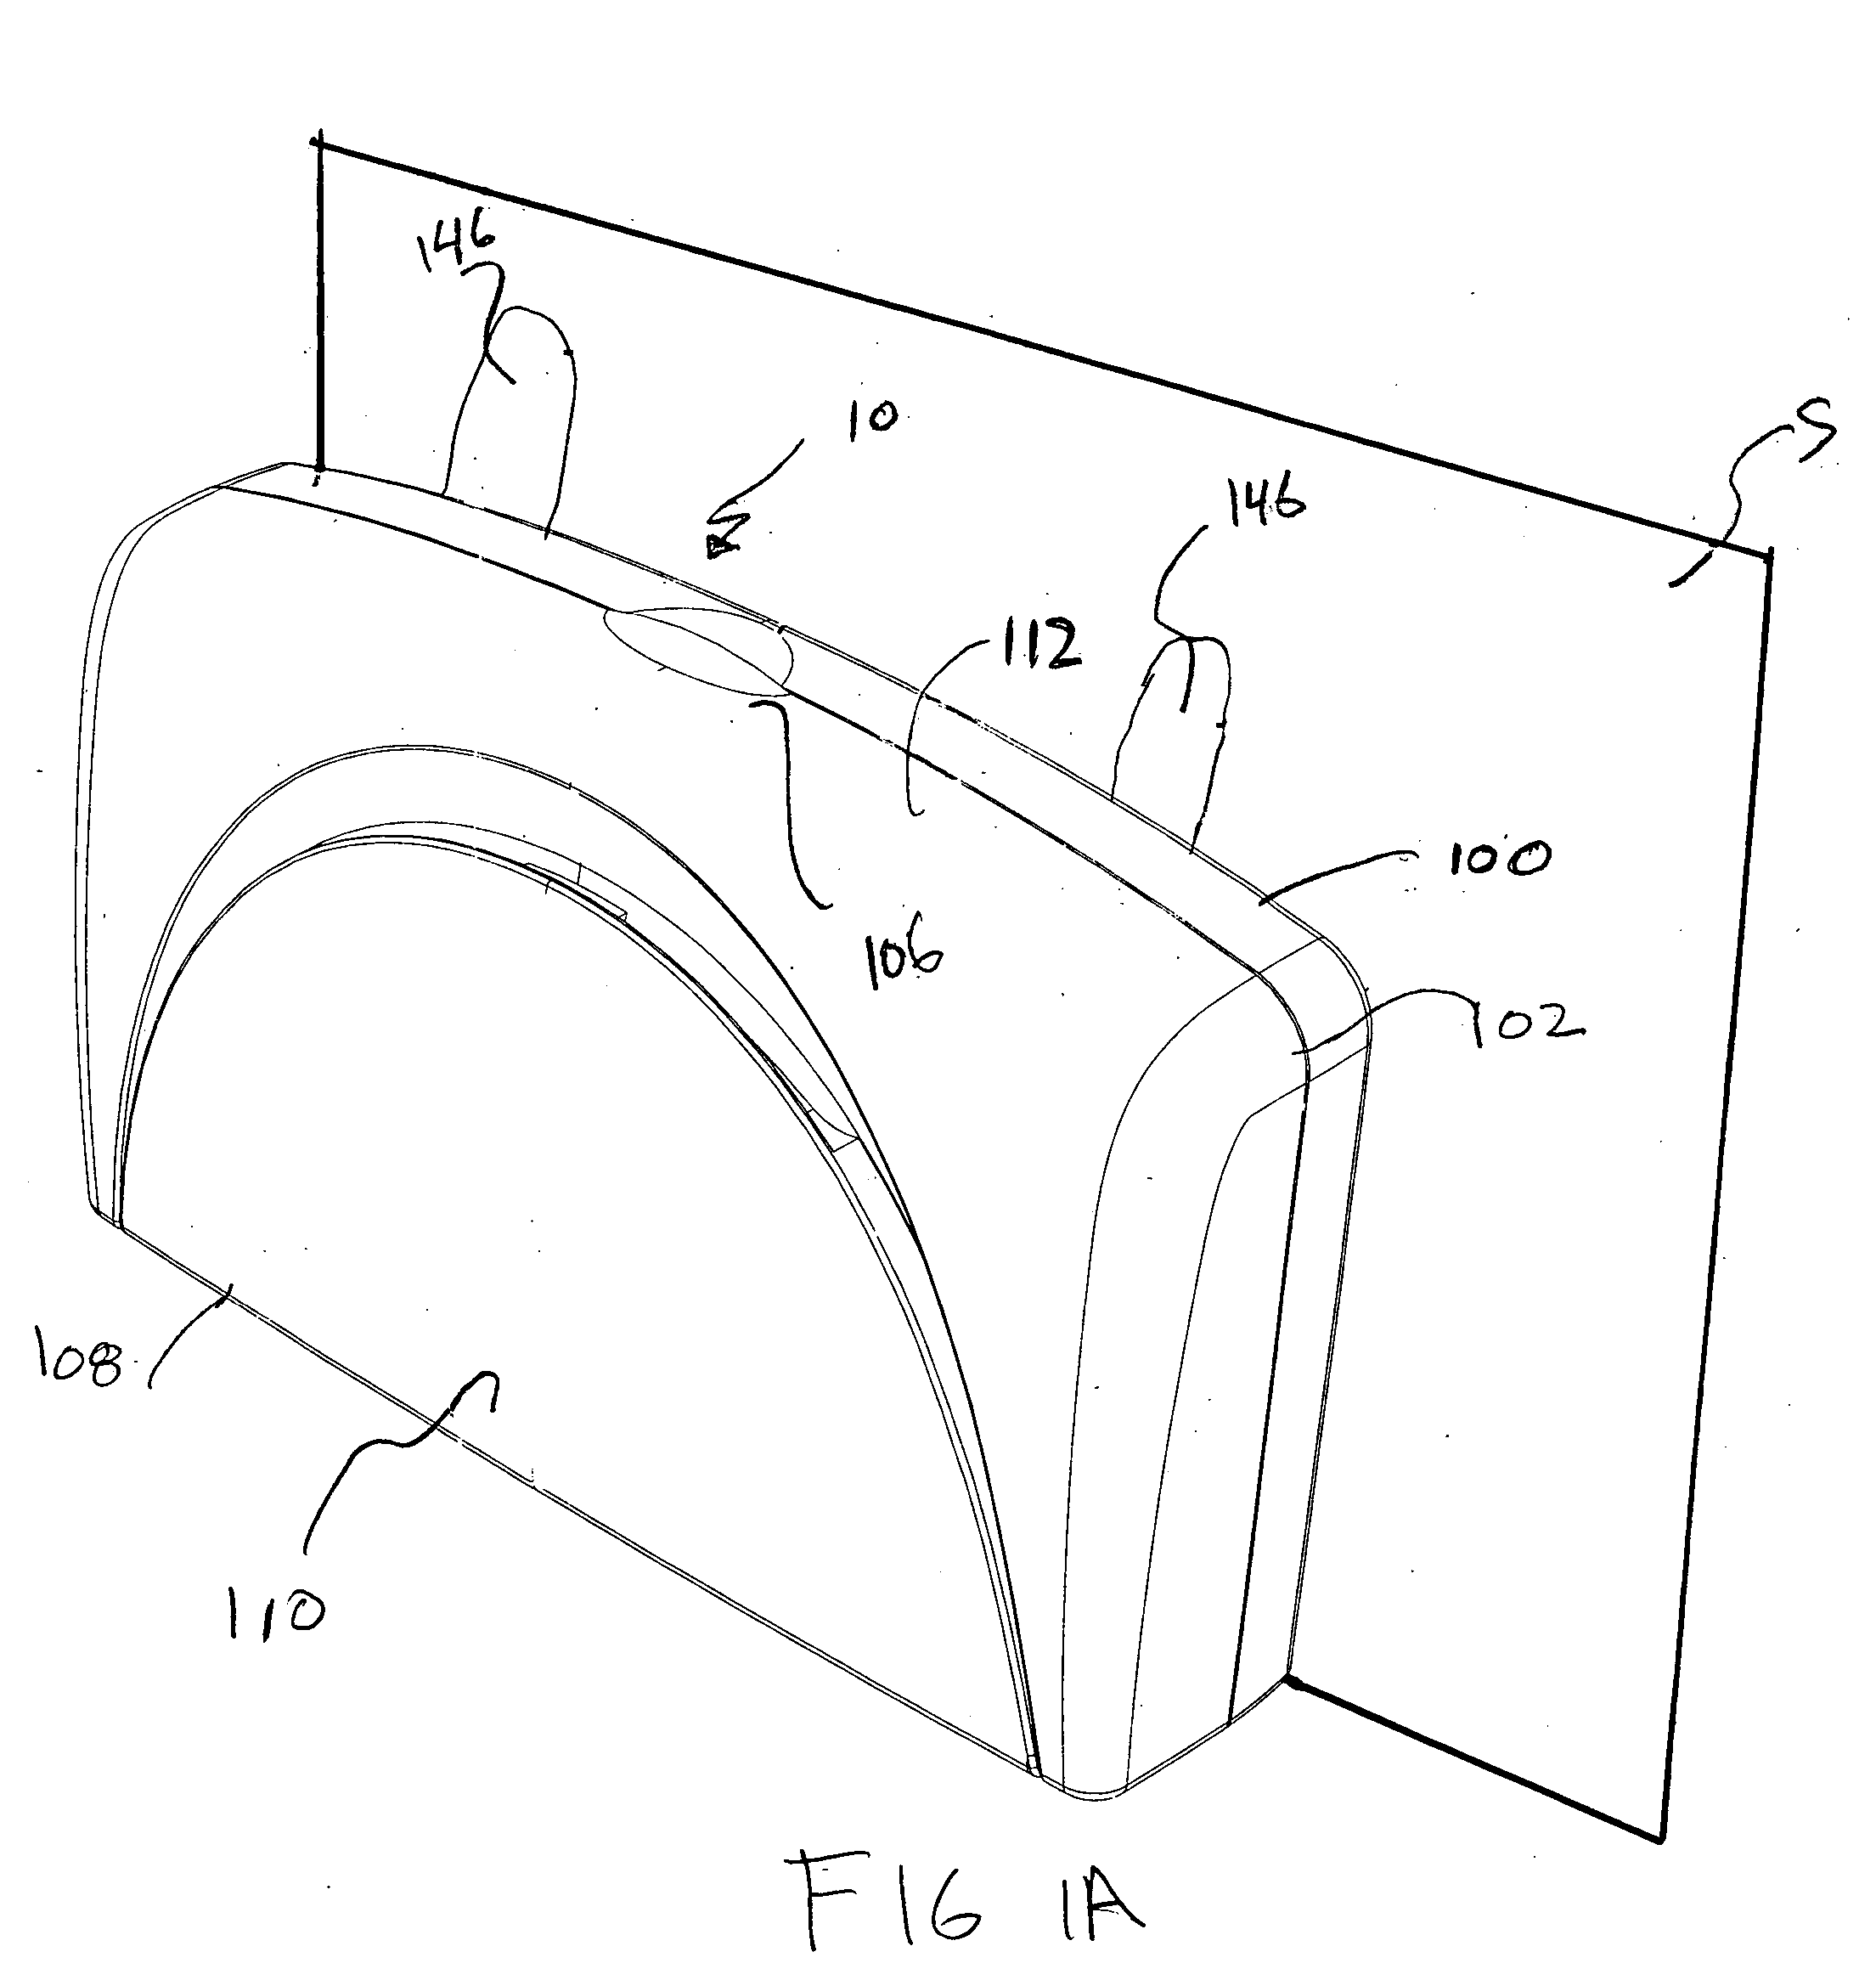 Wipes dispenser with a wide-mouthed dispensing aperture